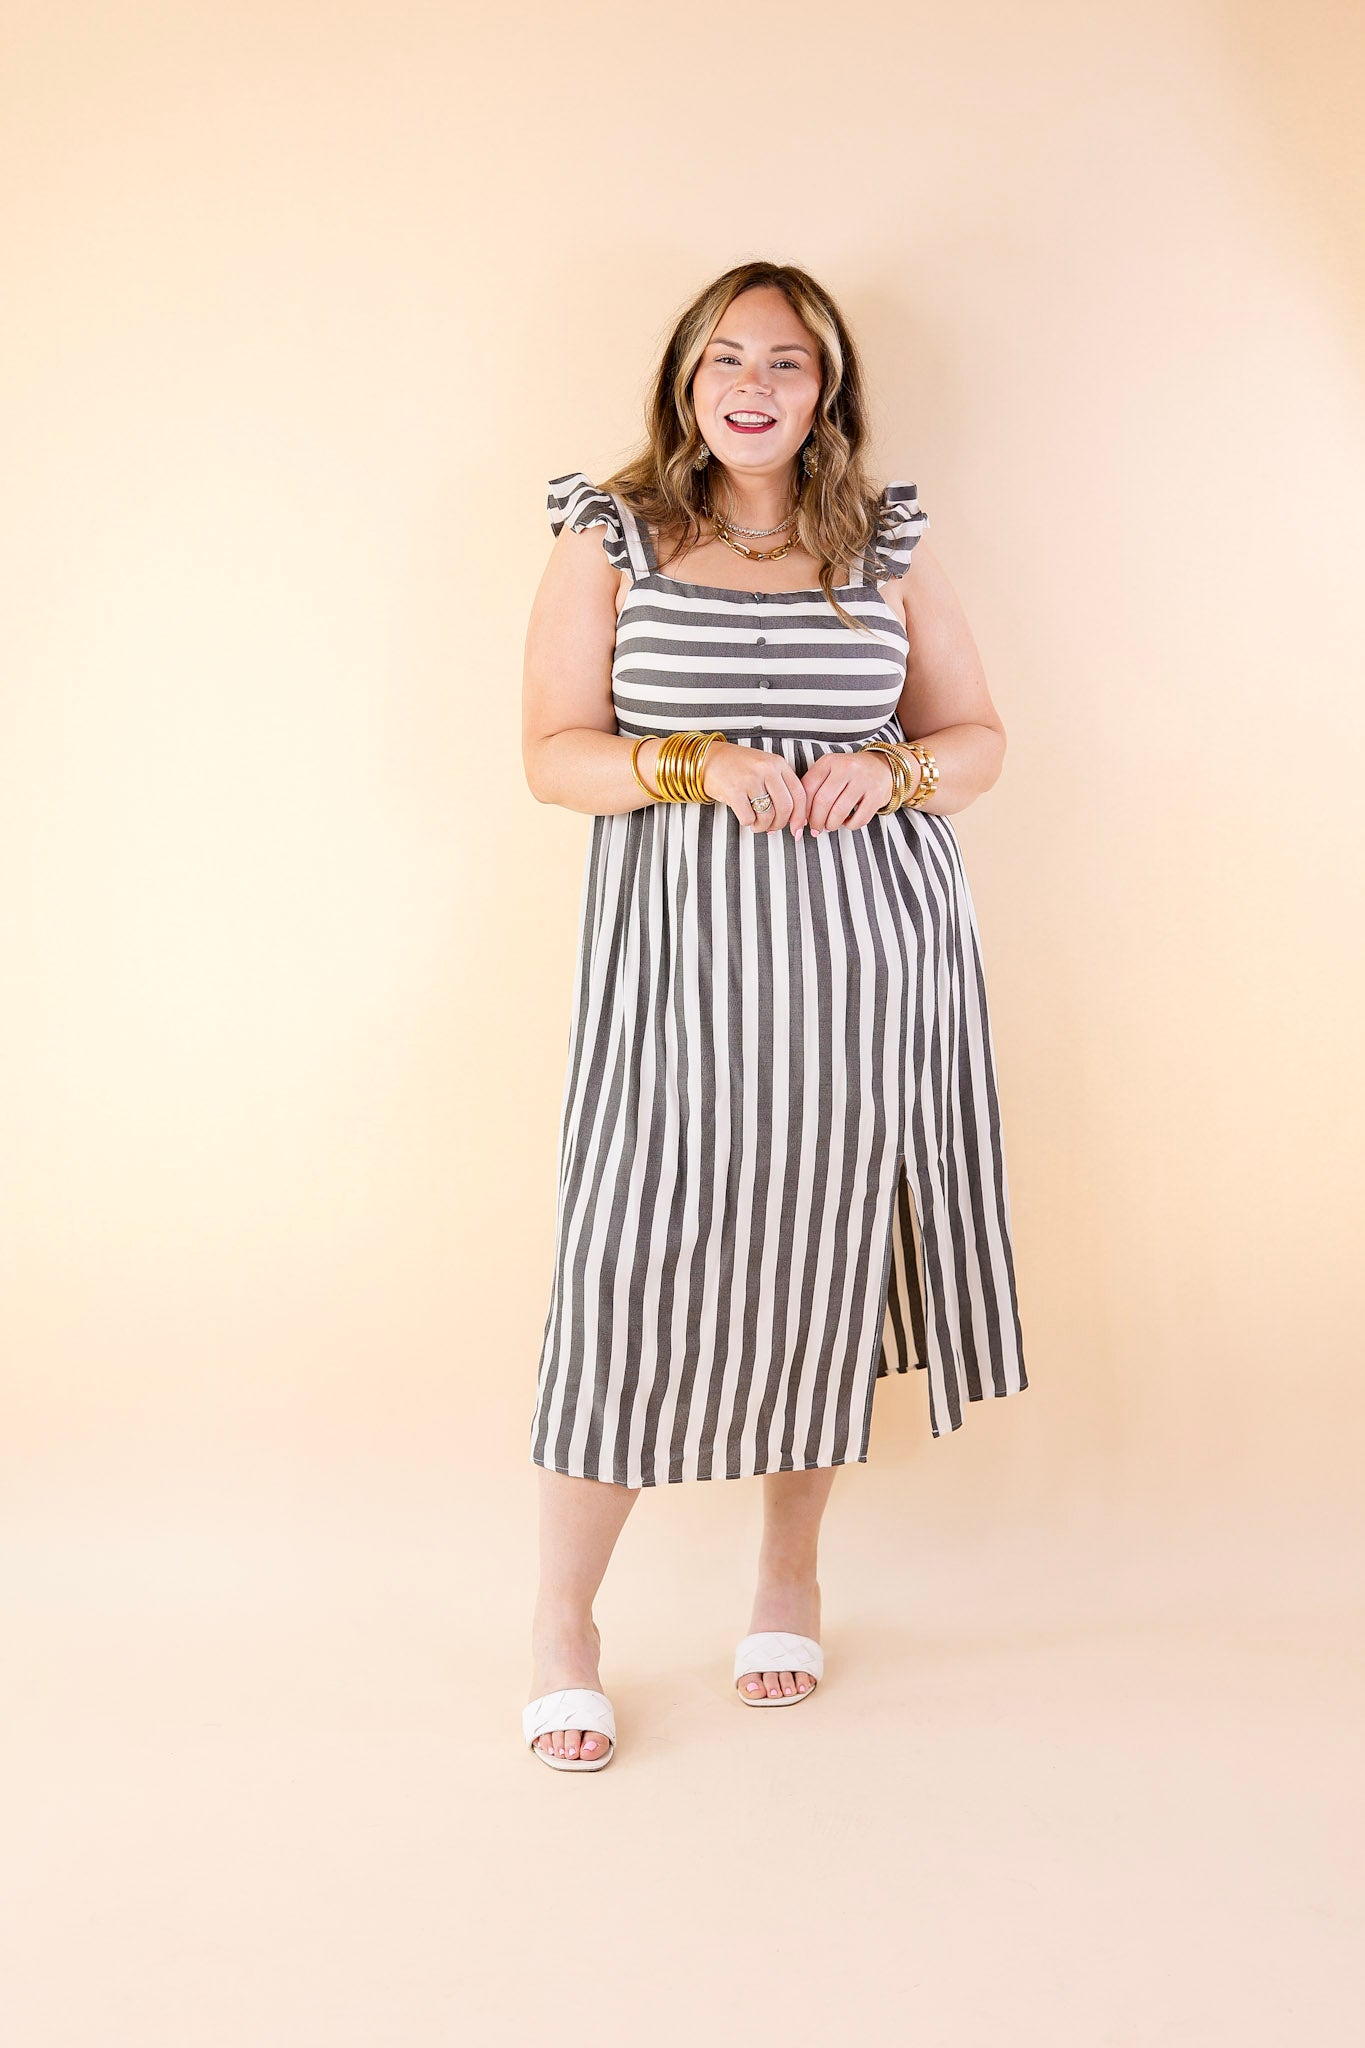 Beach Dreamin Pinstripe Dress in Grey and White - Giddy Up Glamour Boutique